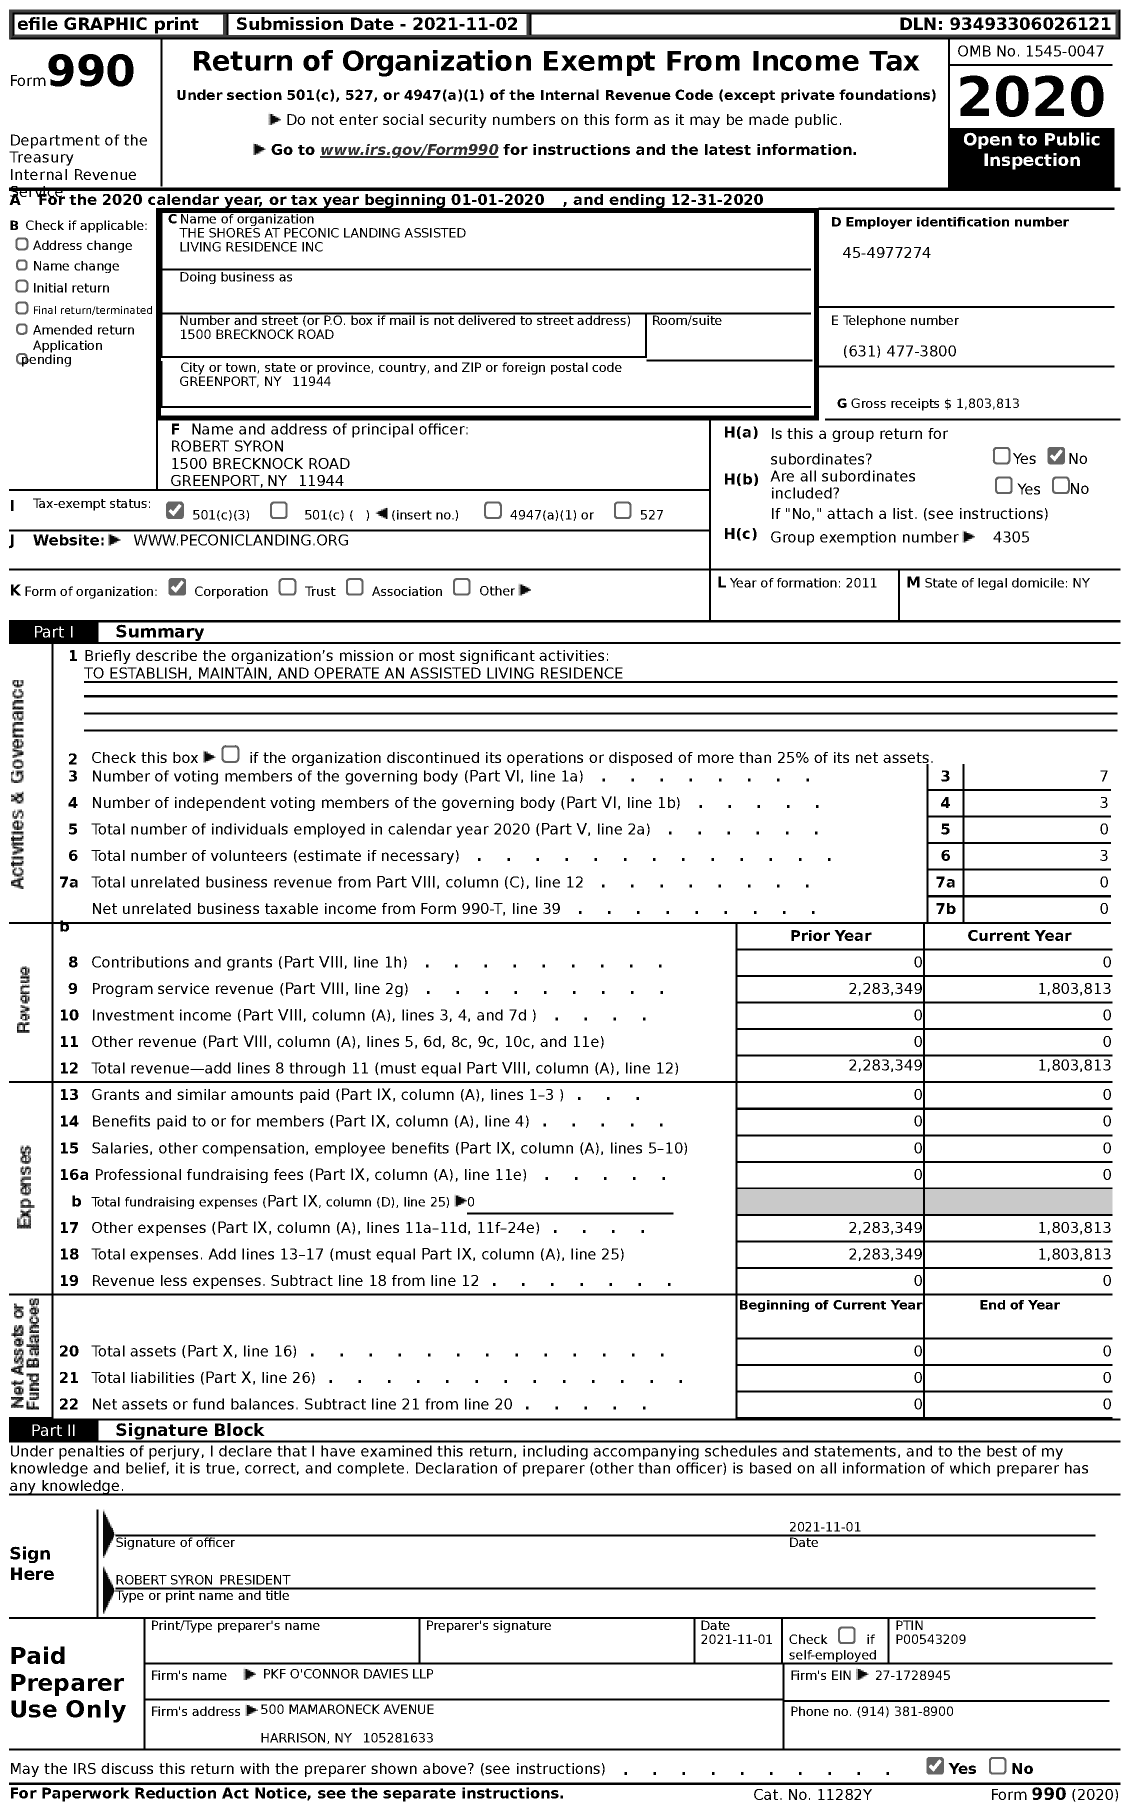 Image of first page of 2020 Form 990 for The Shores at Peconic Landing Assisted Living Residence